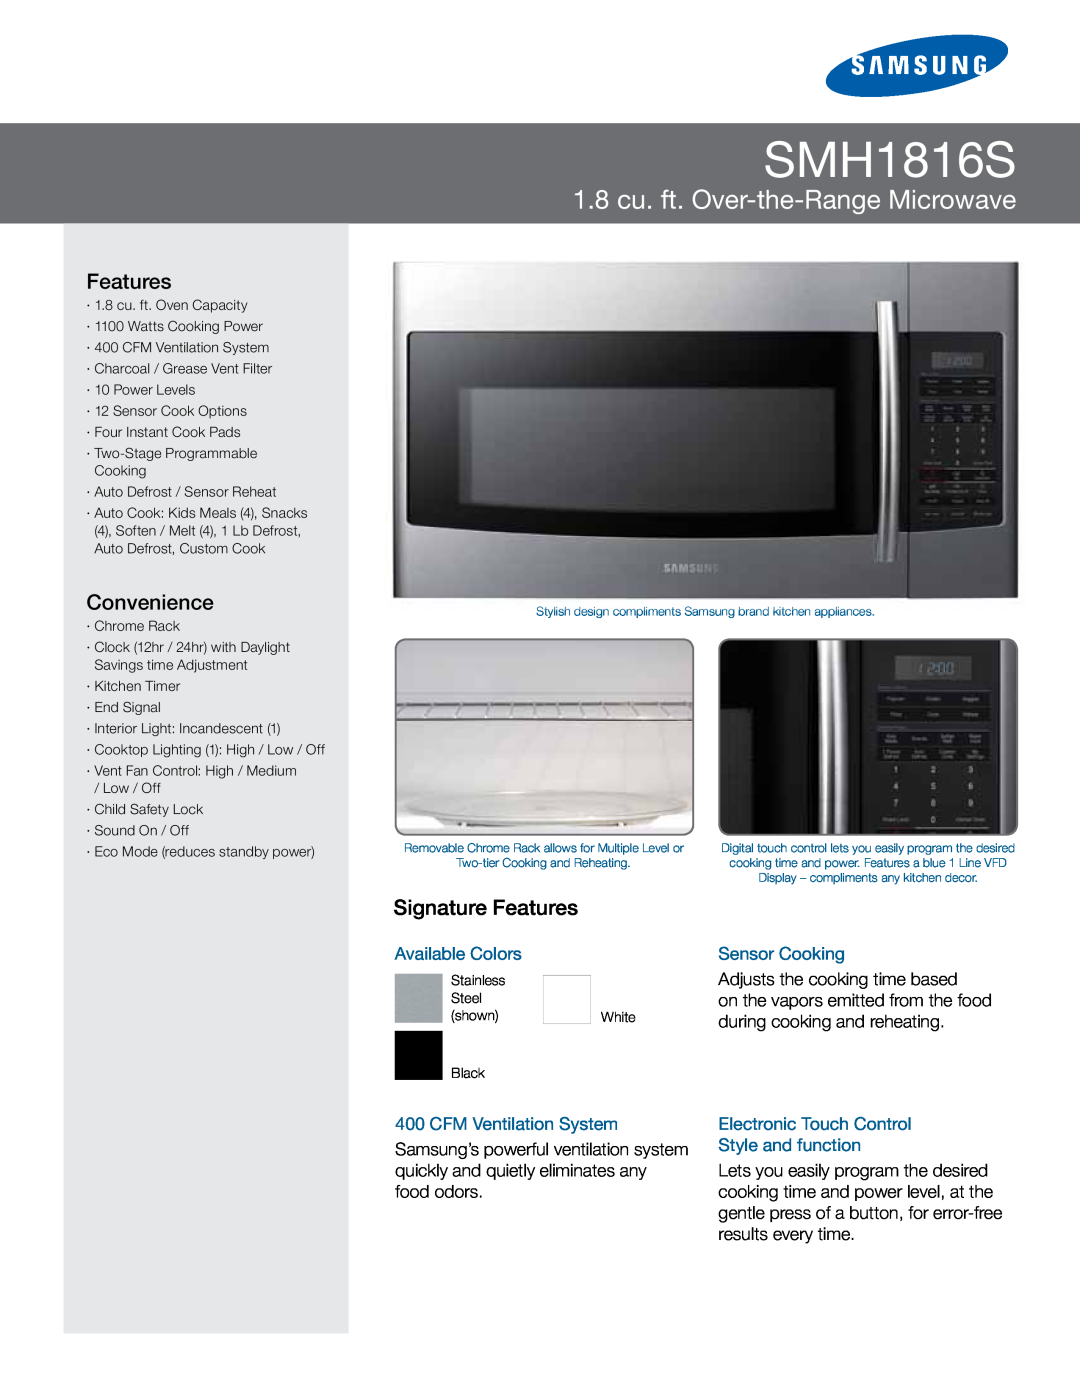 Samsung SMH1816S user manual Microwave Oven, imagine the possibilities, Samsung, English, SMH1816XAADE68-03942AEN+MES.indb 